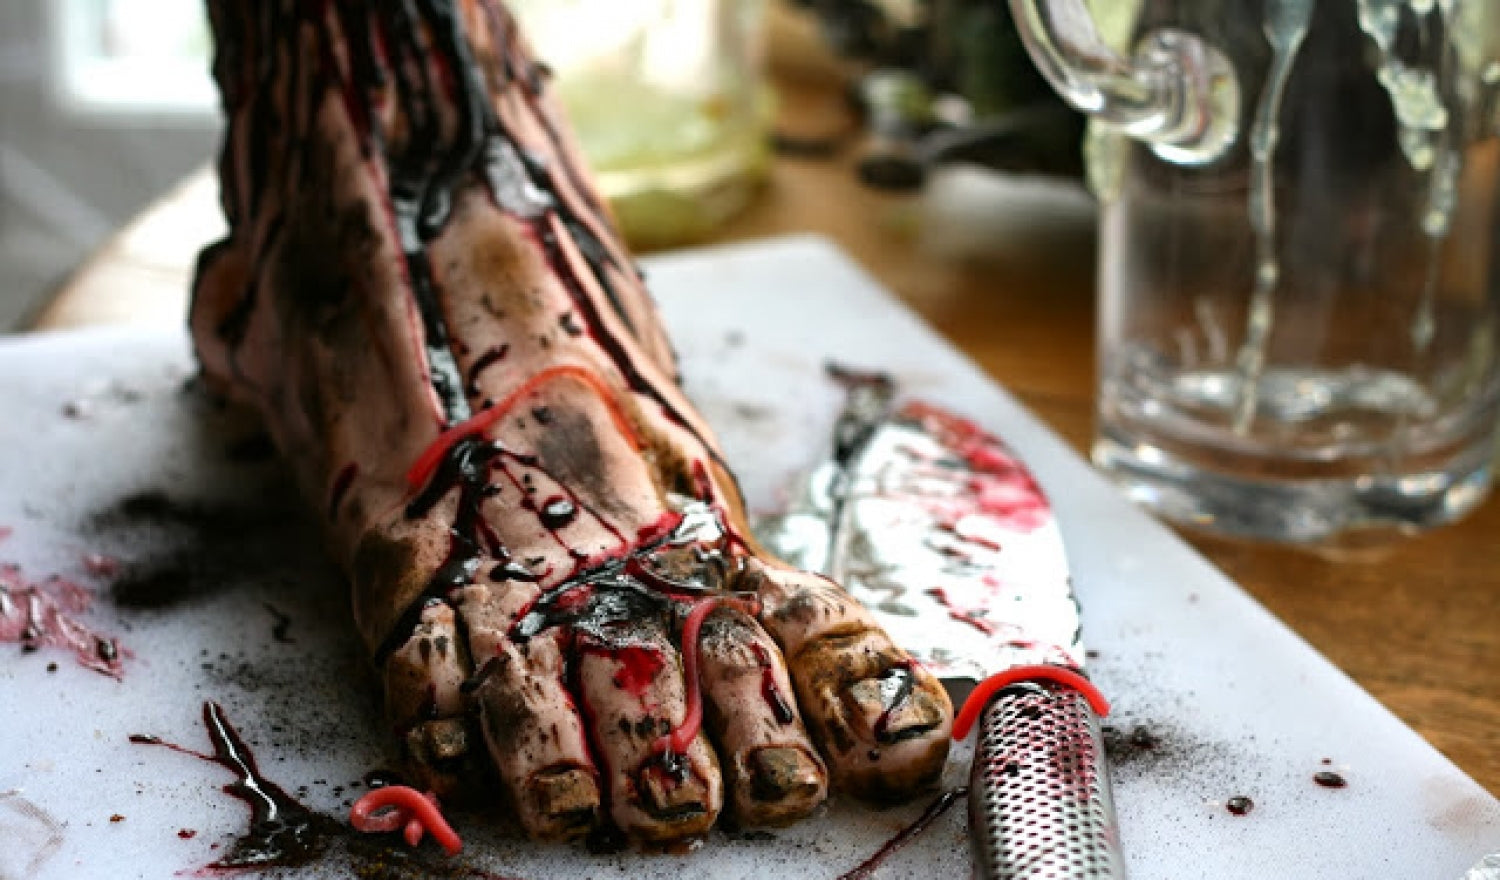 5 Gory Halloween Cakes To Delight And Disgust